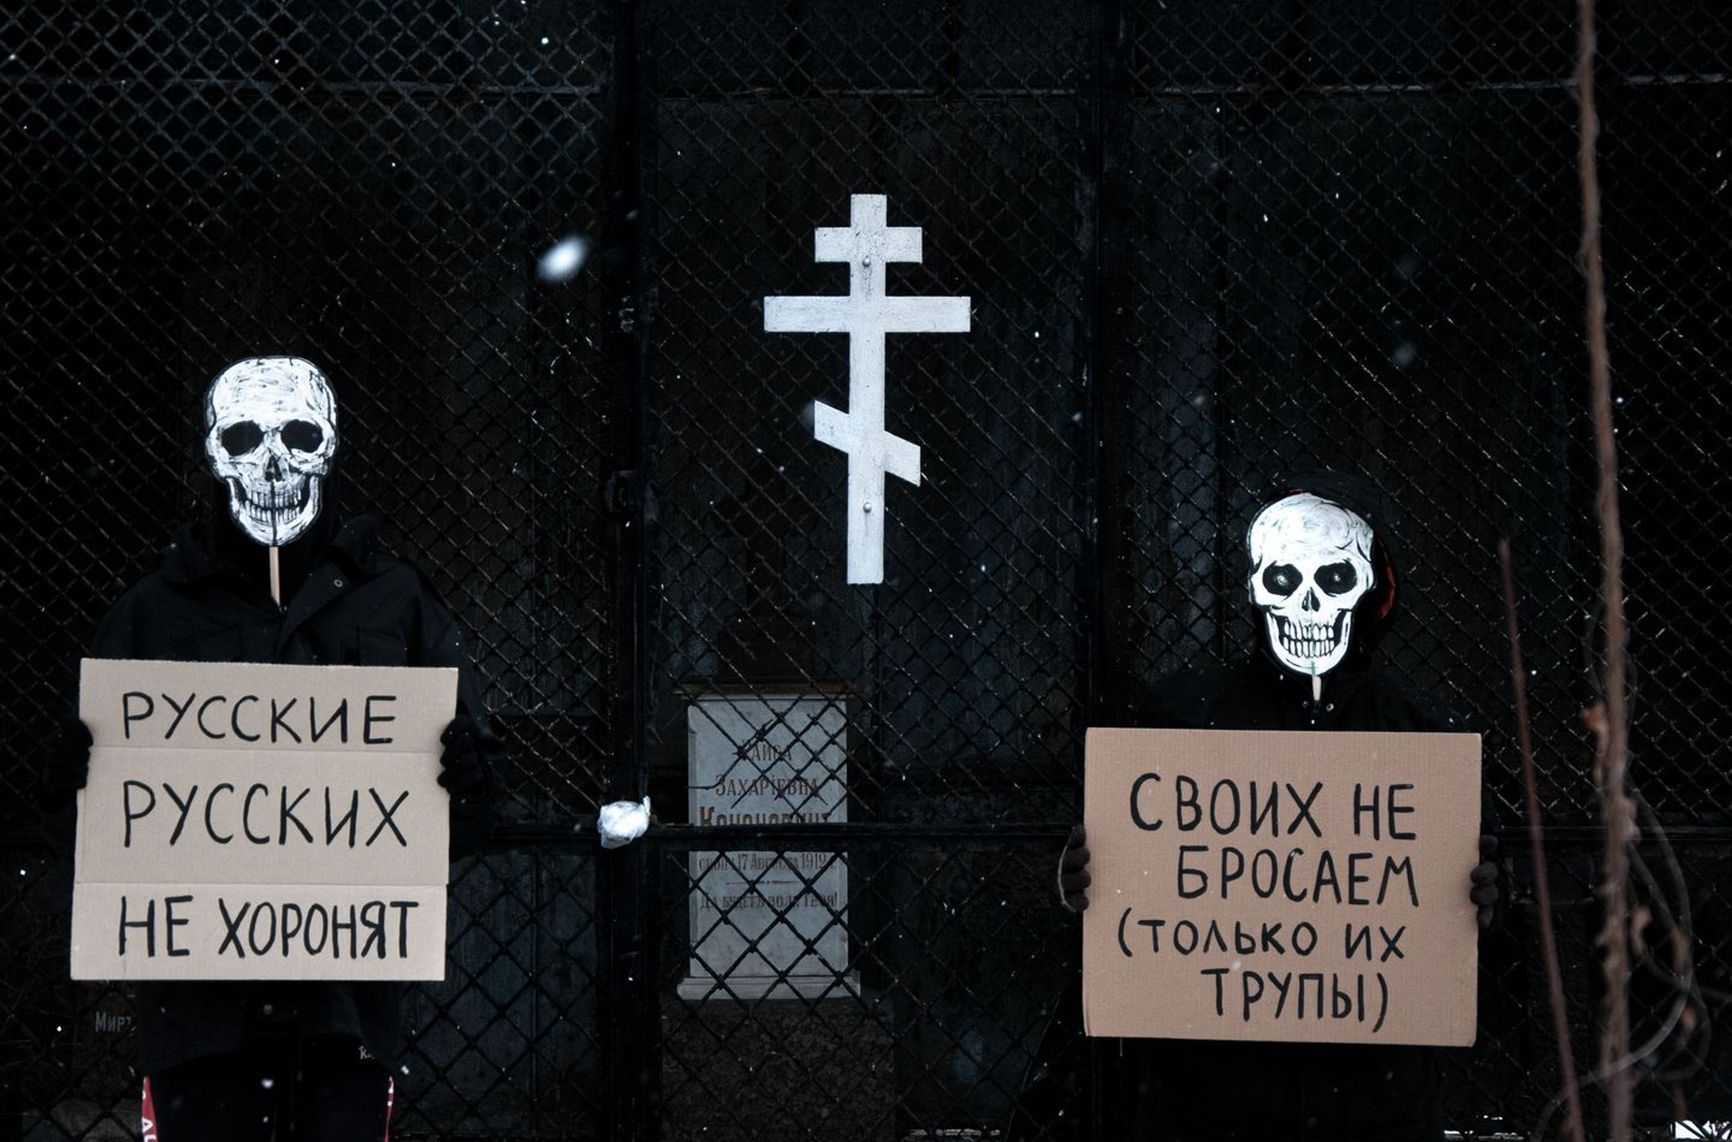 "Russians do not bury Russians." "We don't leave ours behind (only their corpses)."